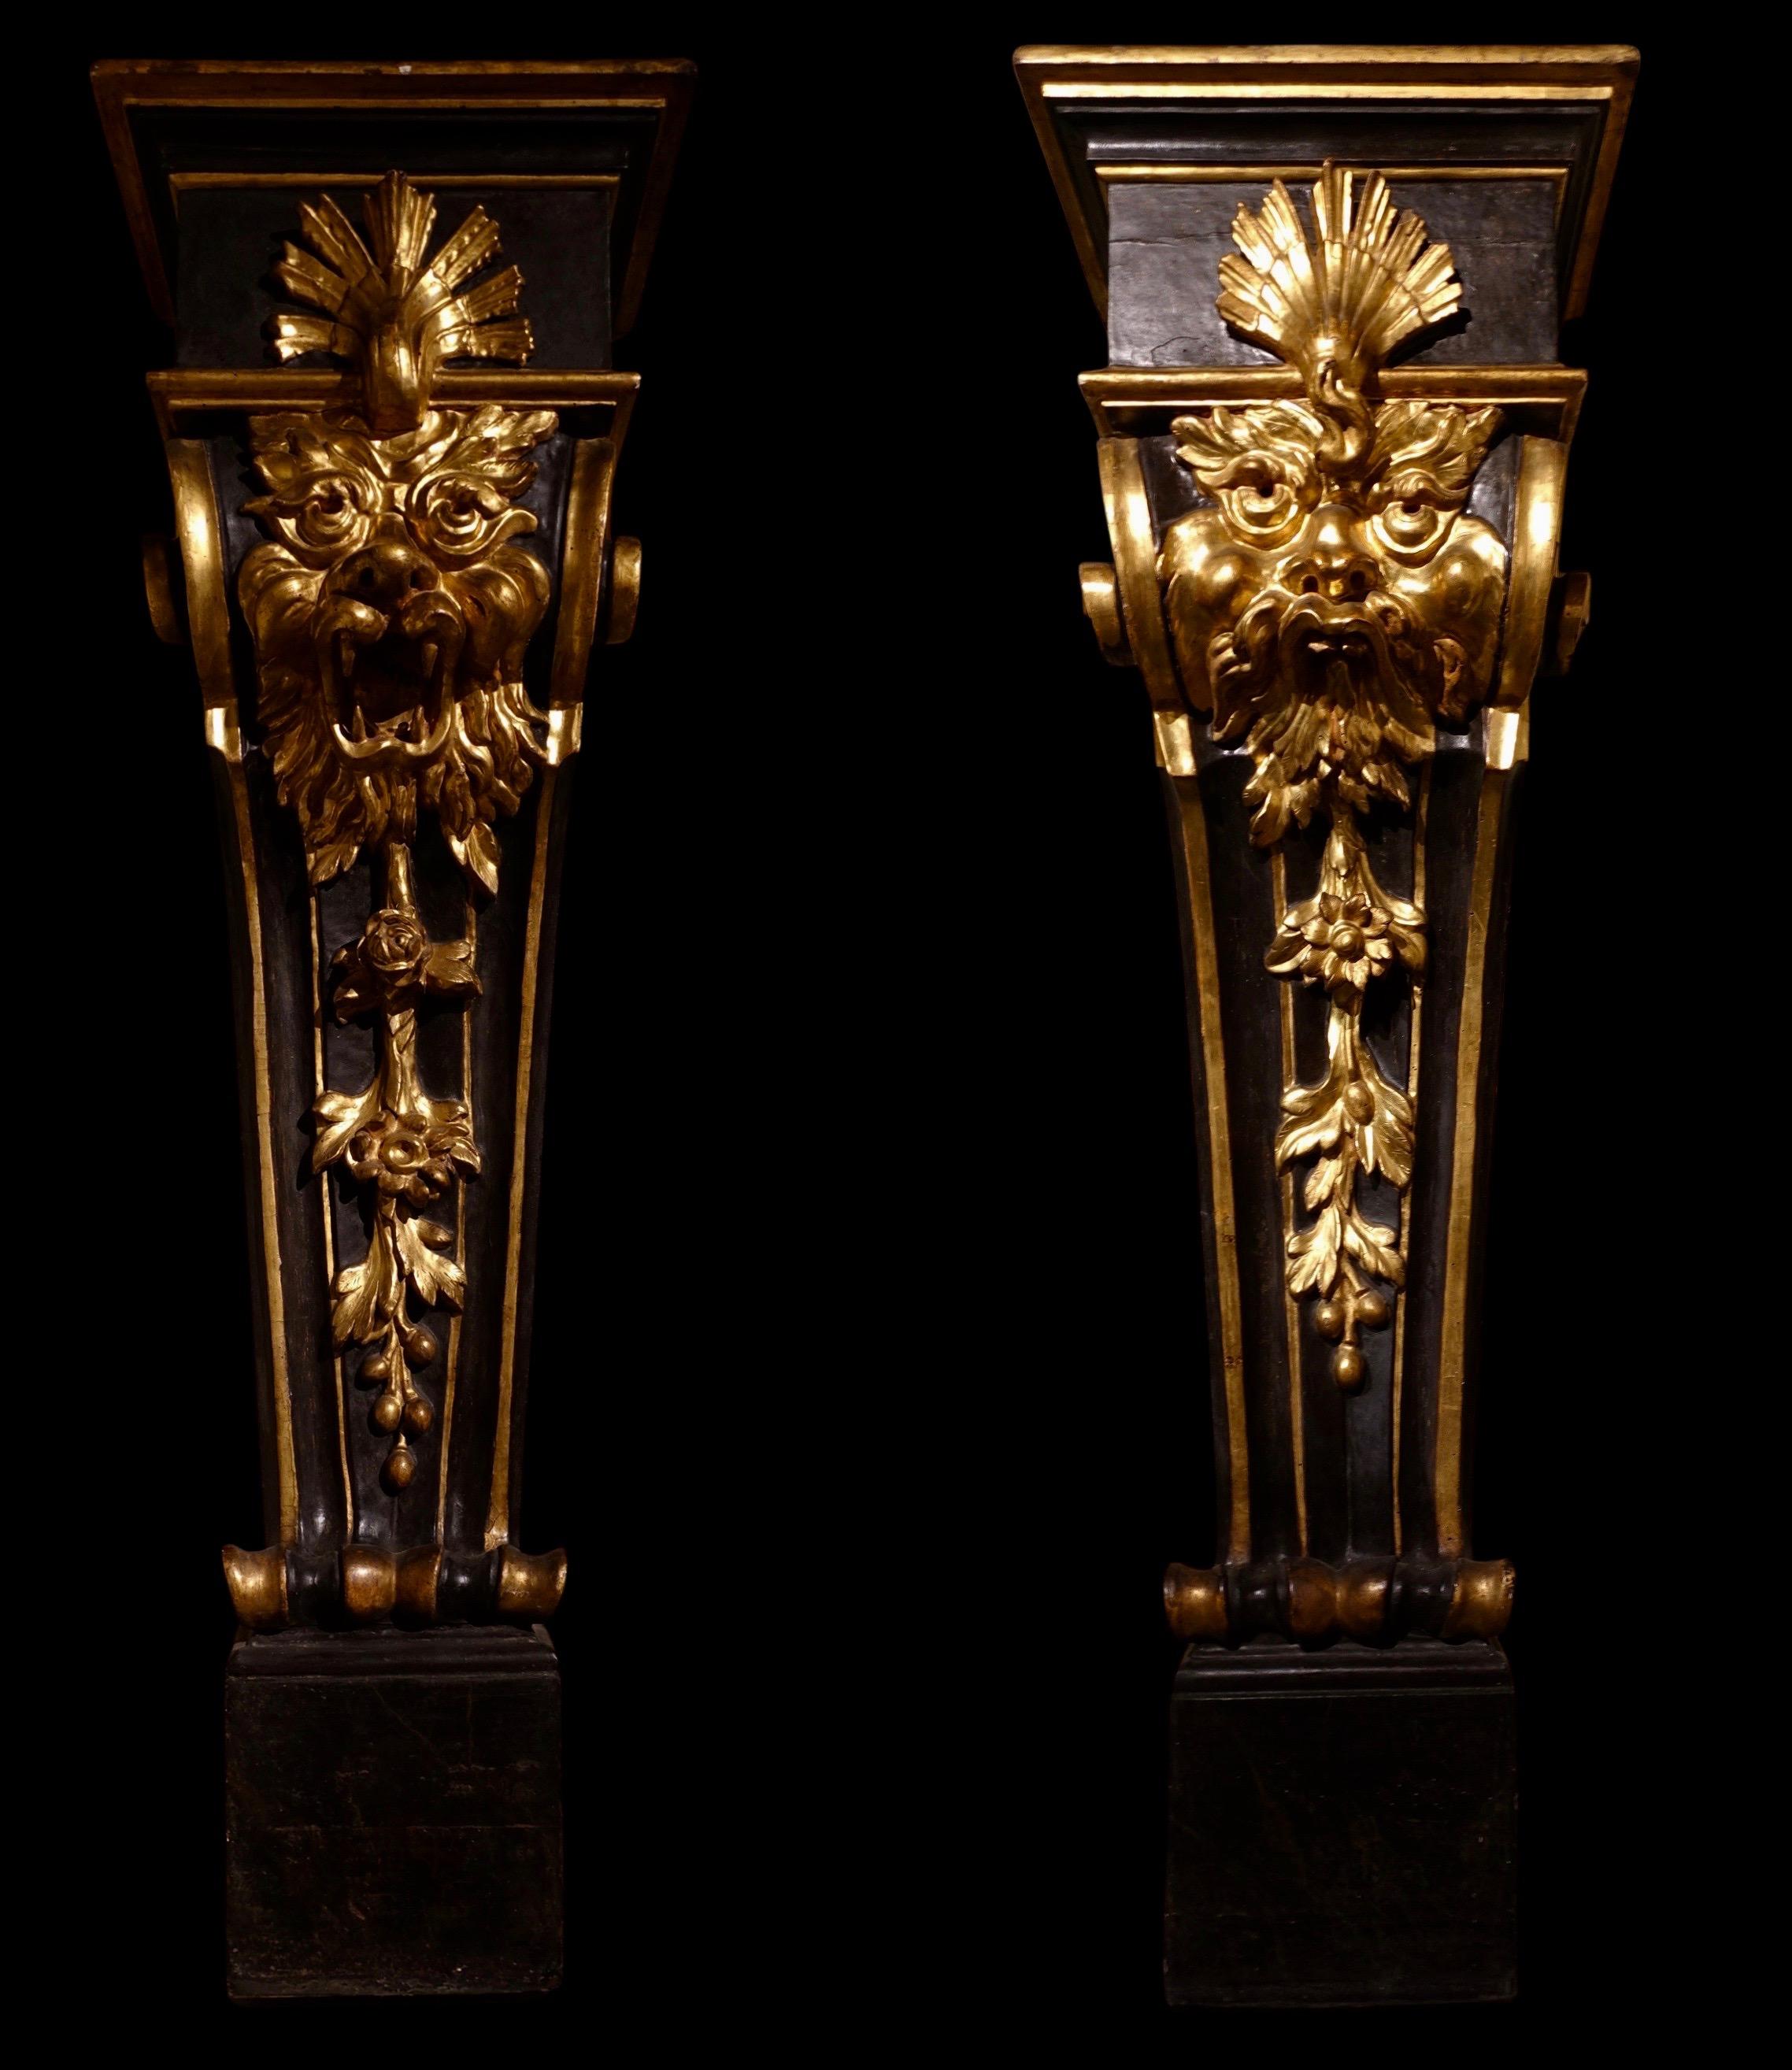 Carved Rare Pair of Pedestals Decorated with Grotesques, Florence, Early 17th Century